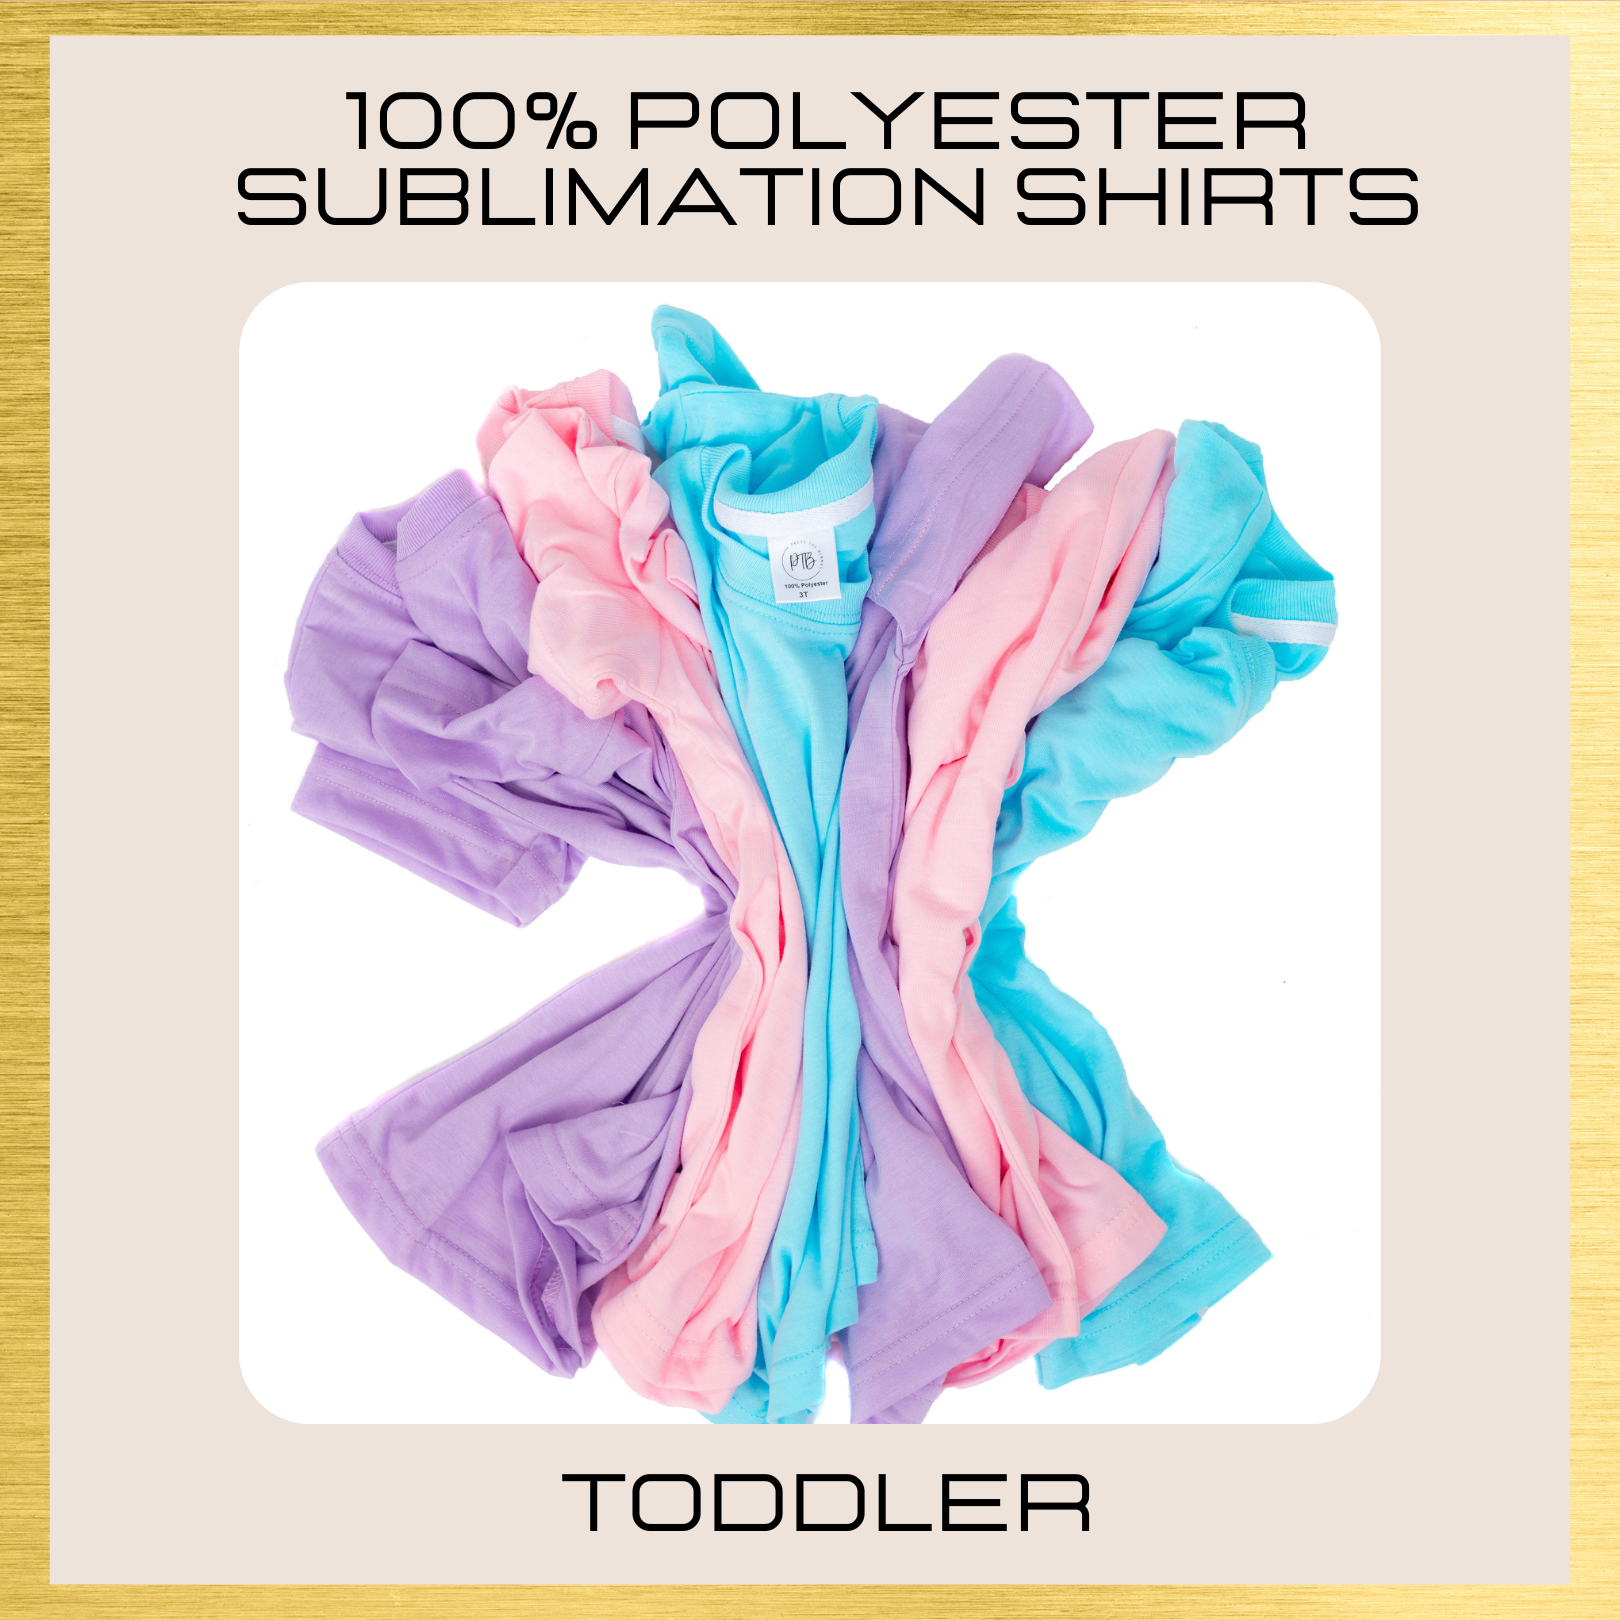 100% Polyester Toddler T-Shirt - Sublimation Shirts - Ebest Store